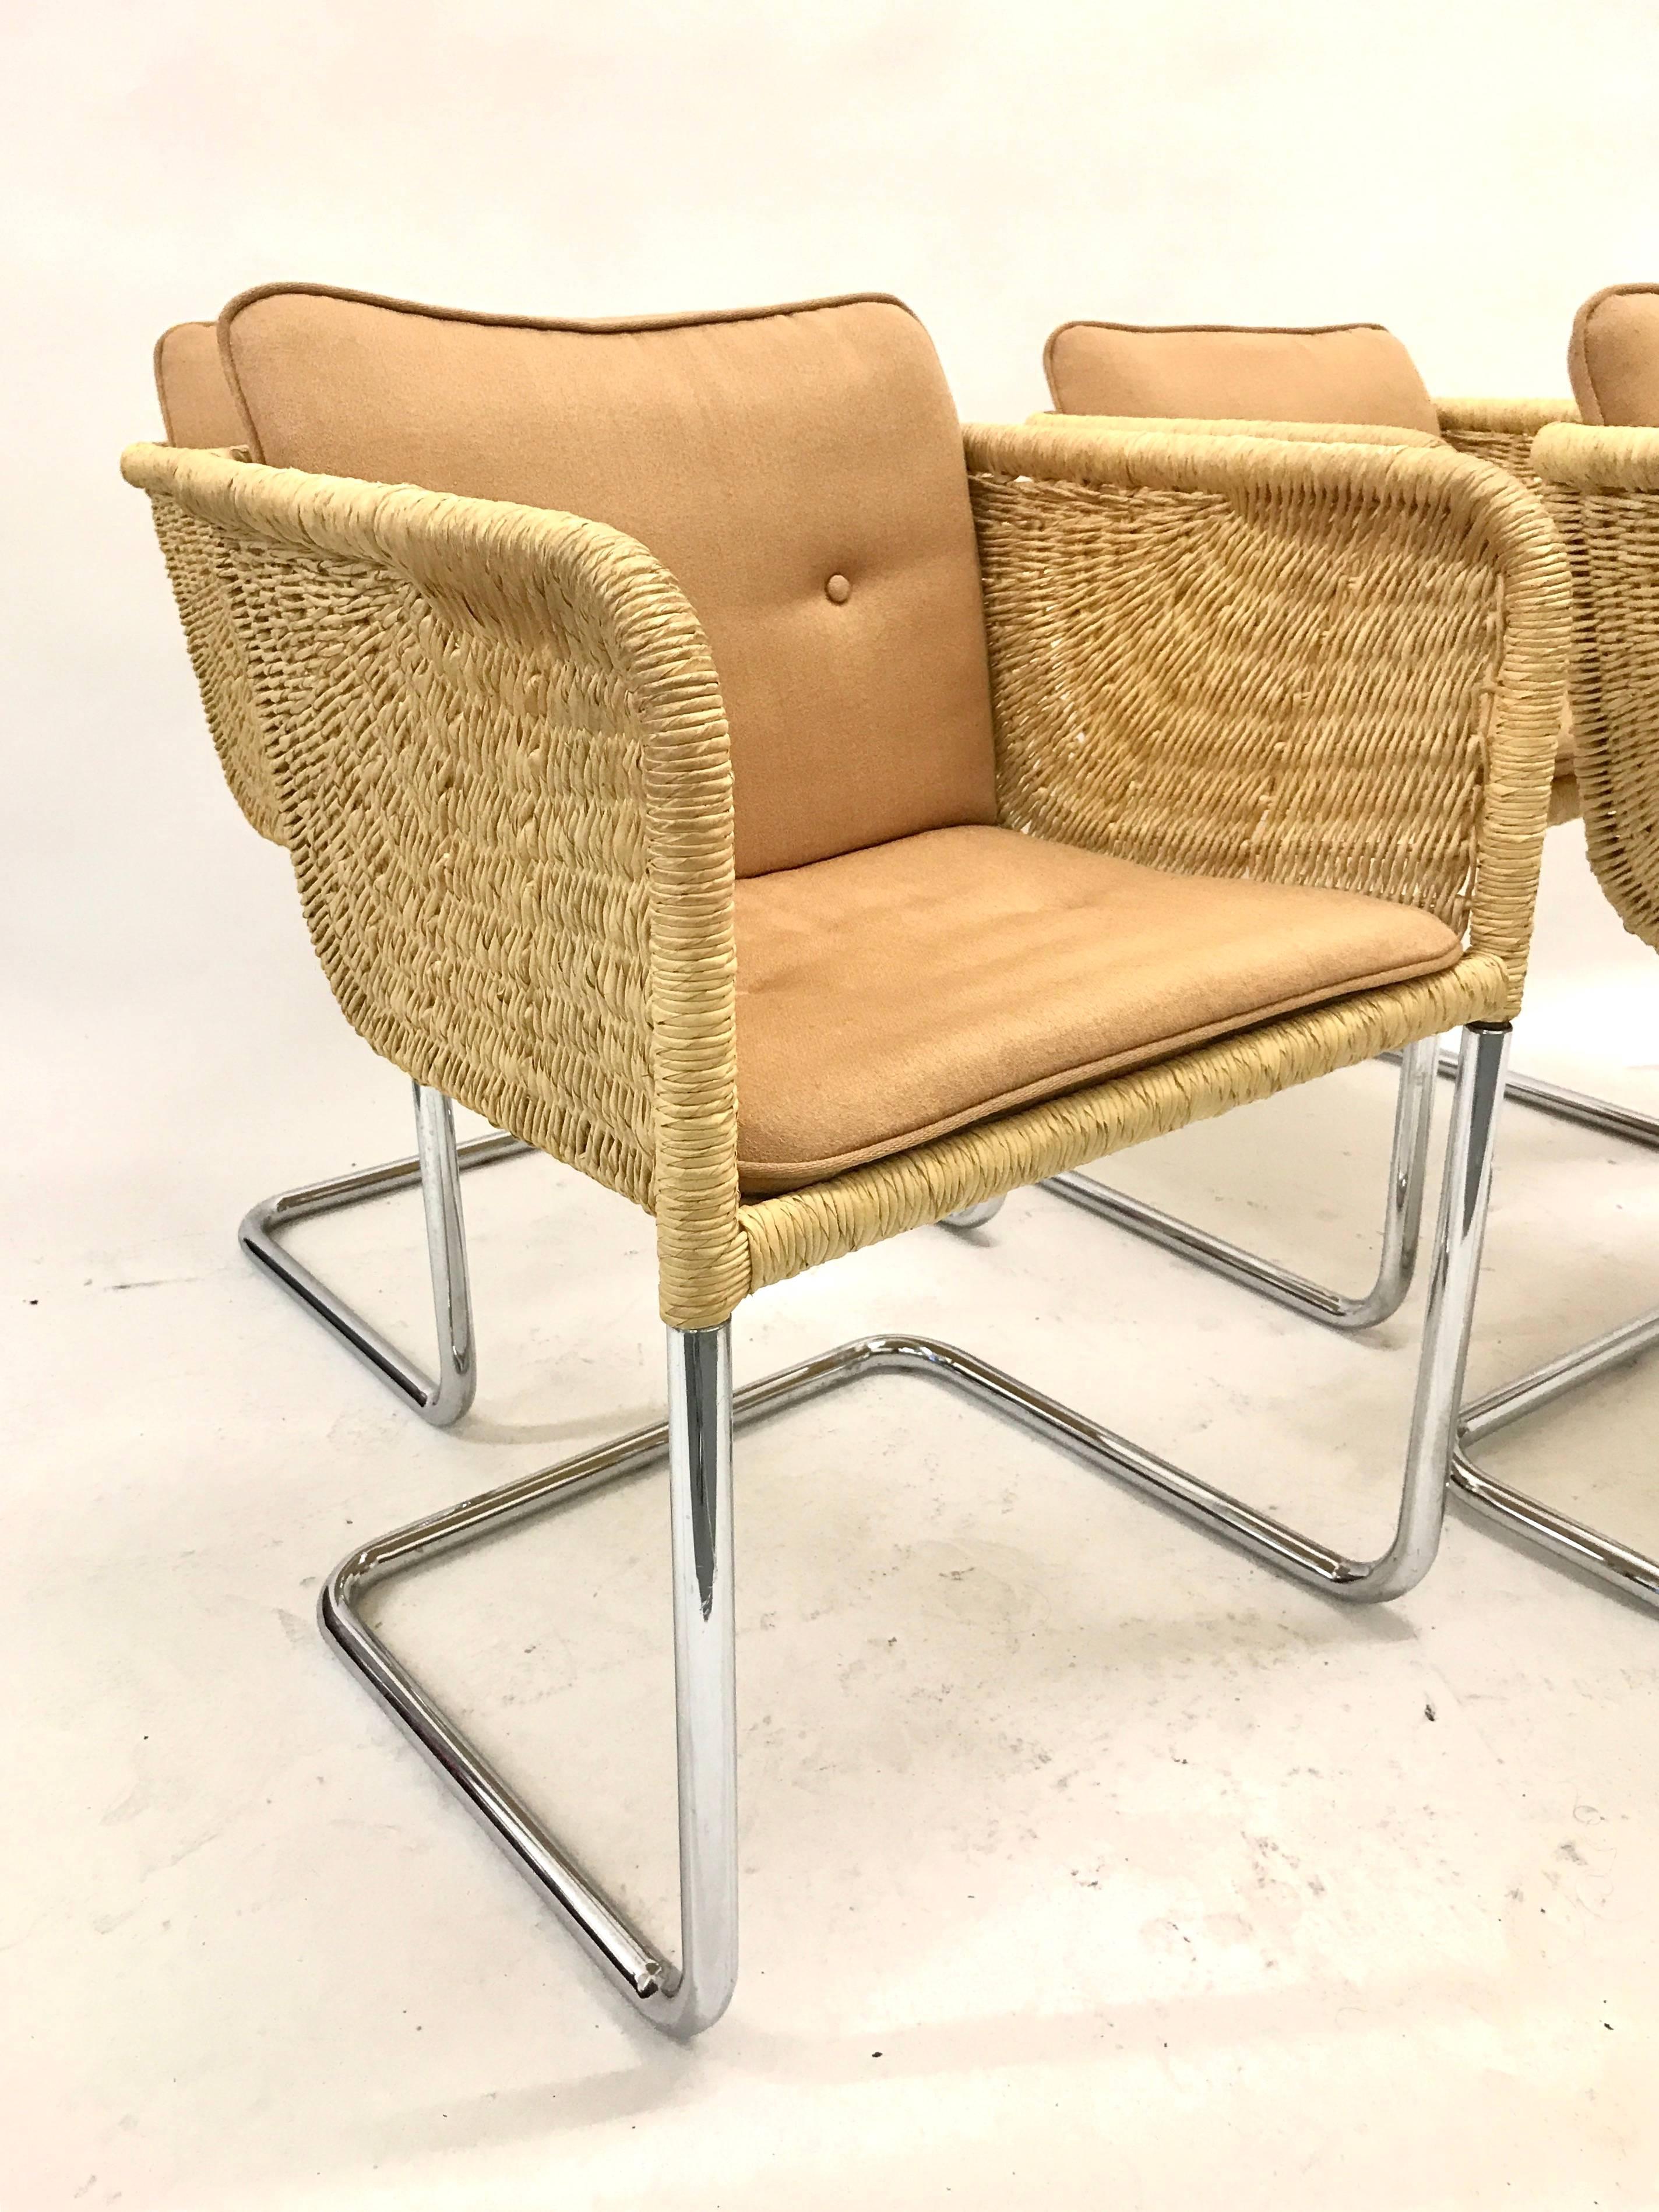 cantilever wicker chair